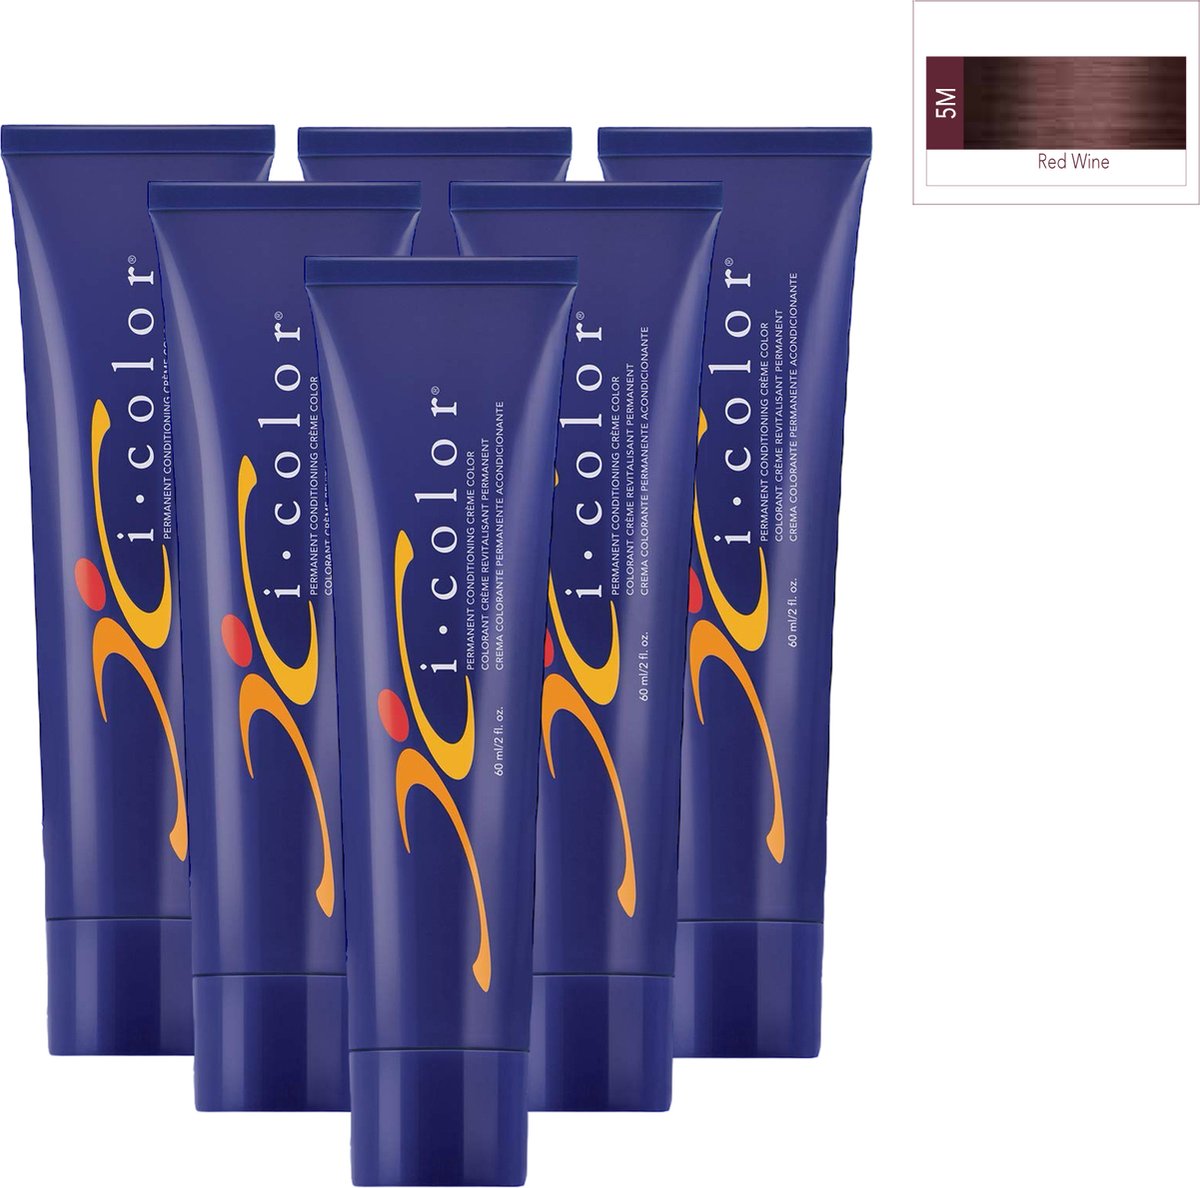 ISO i color Permanent Conditioning Crème Color 60ml 5M Dark Red Wine x 6 tubes